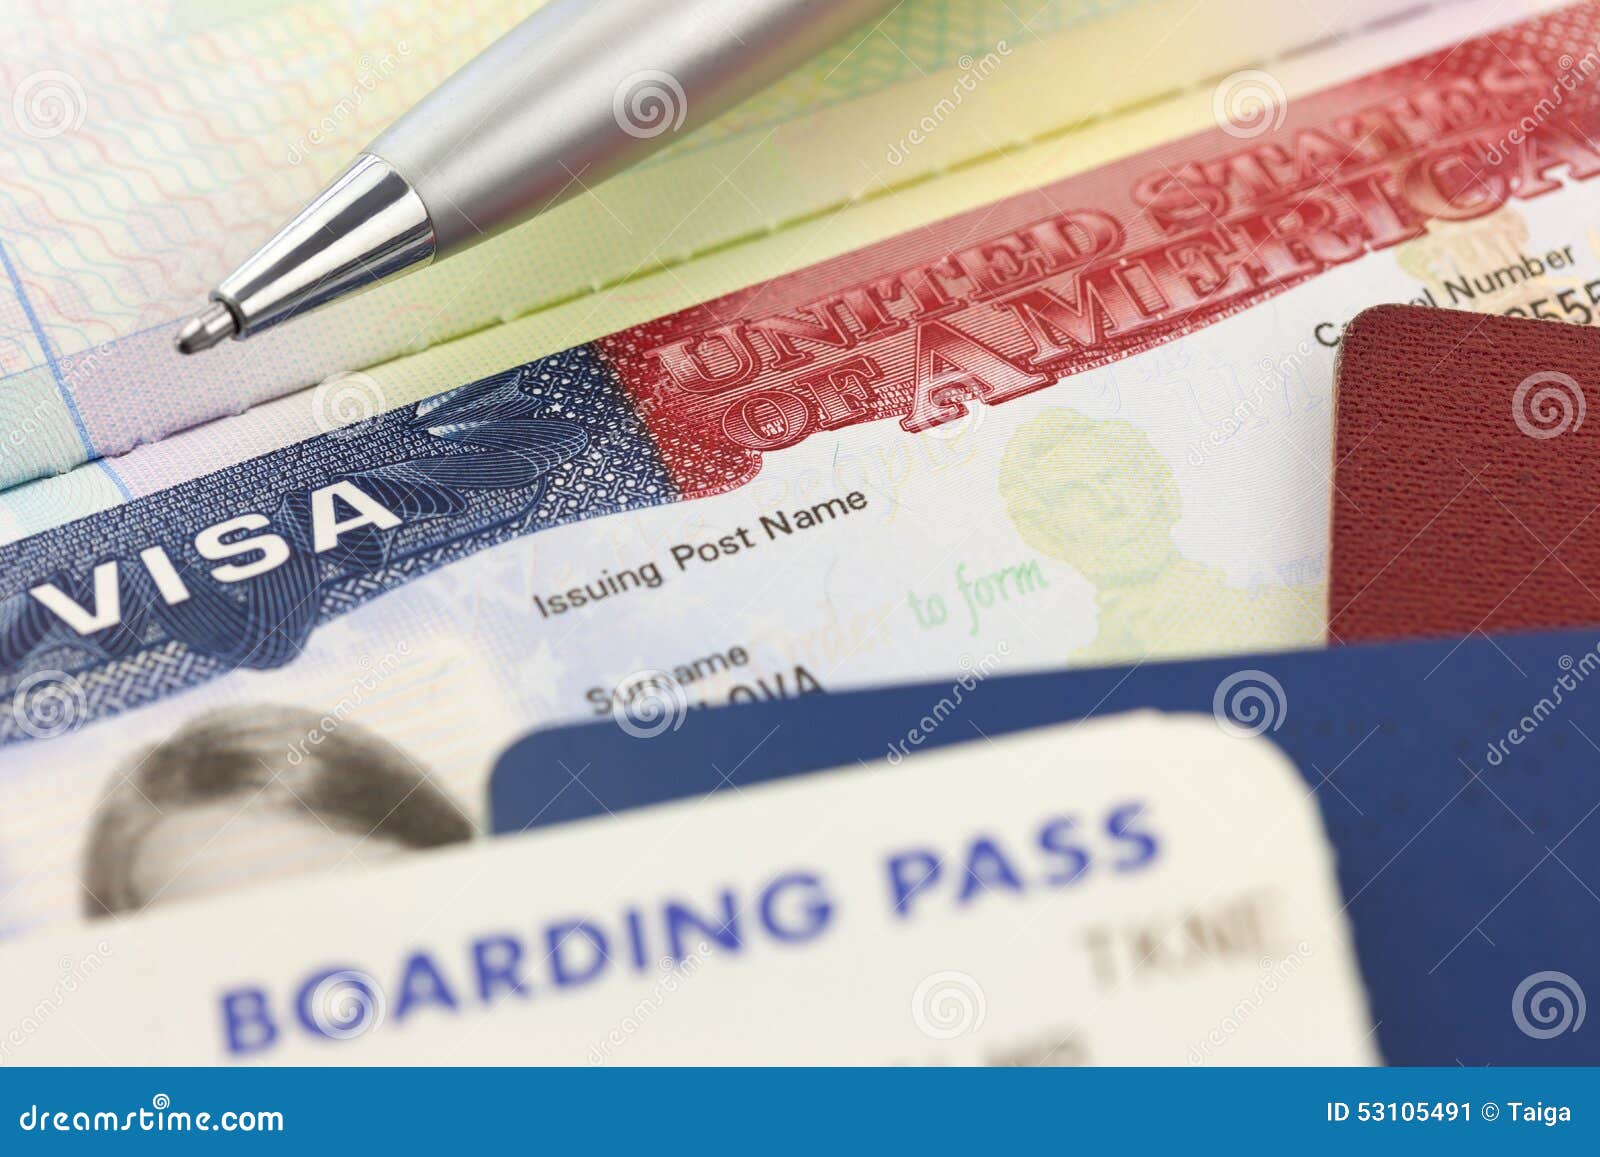 usa visa, passports, boarding pass and pen - foreign travel